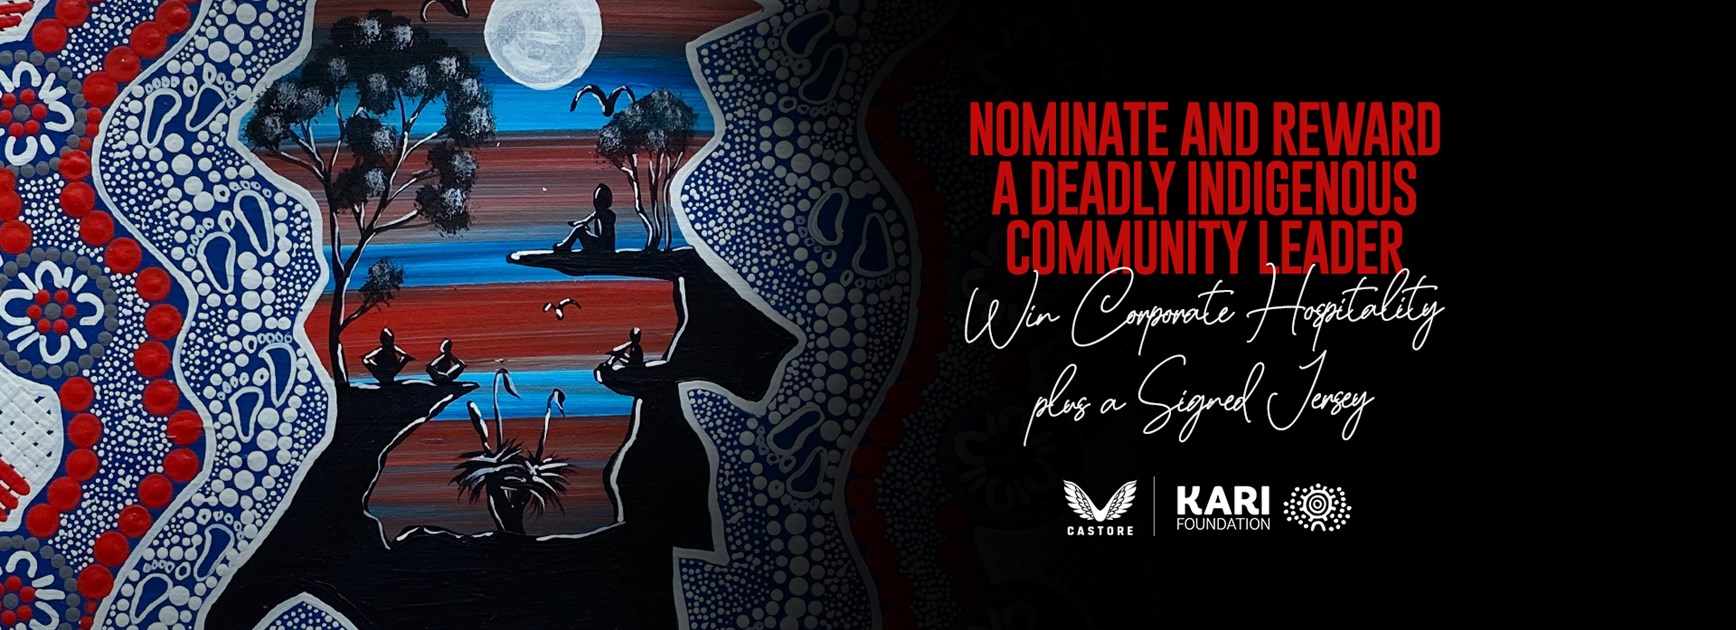 Nominate and Reward a Deadly Indigenous Community Leader